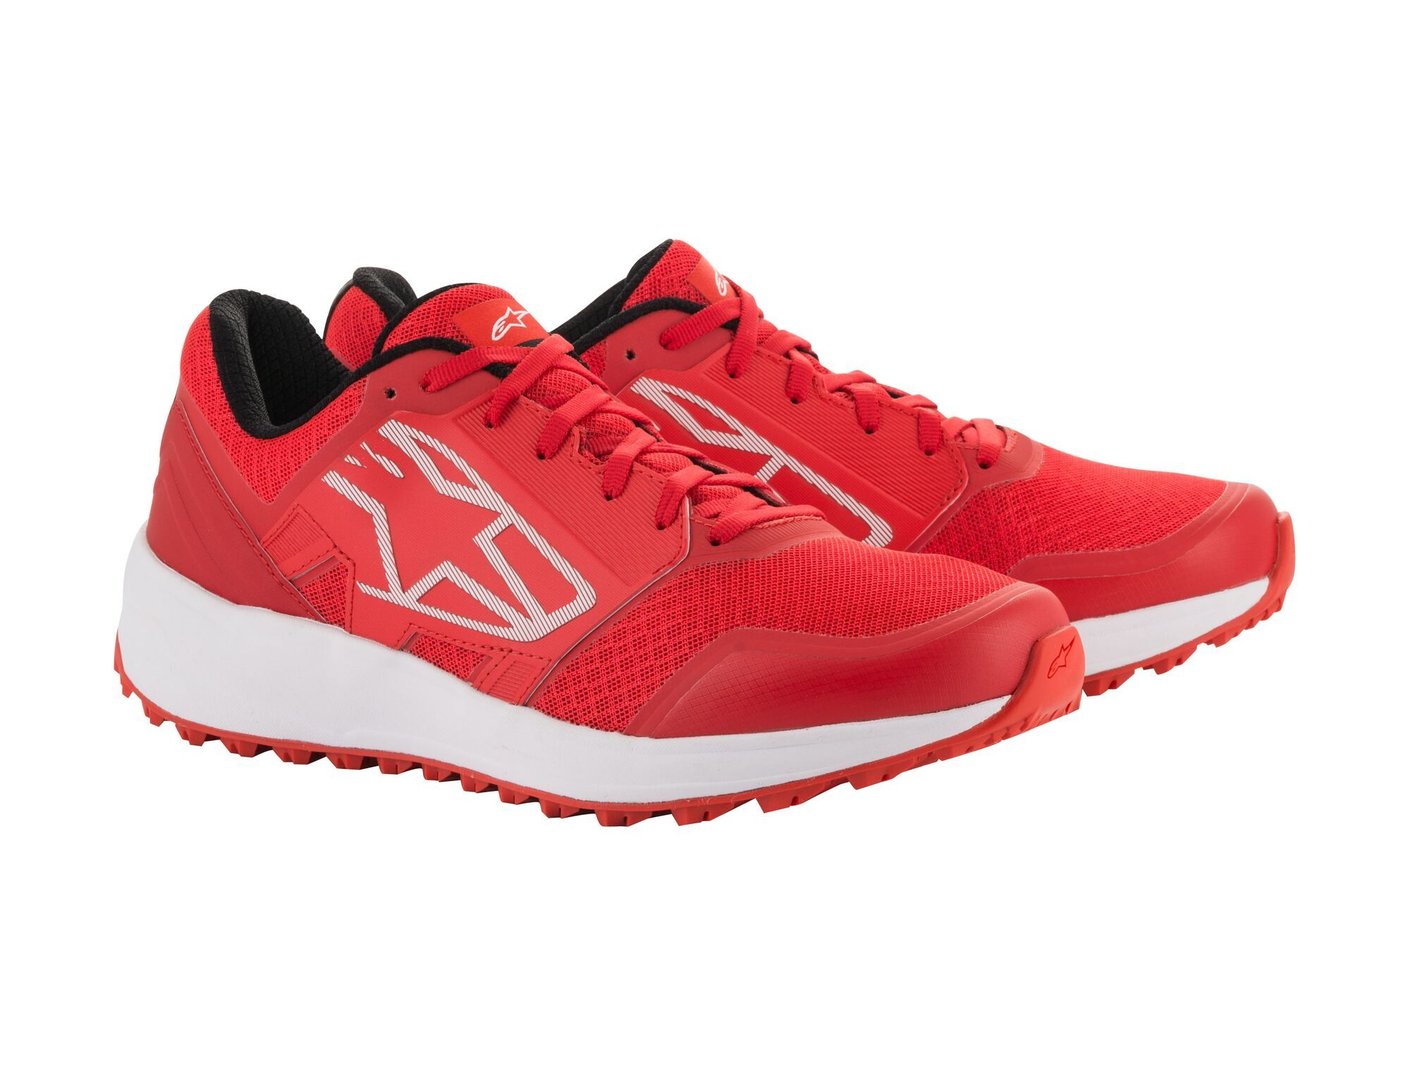 ALPINESTARS 2654820_32_14 META TRAIL RUNNING shoes, red/white, size 48 (14) (Фото-1)